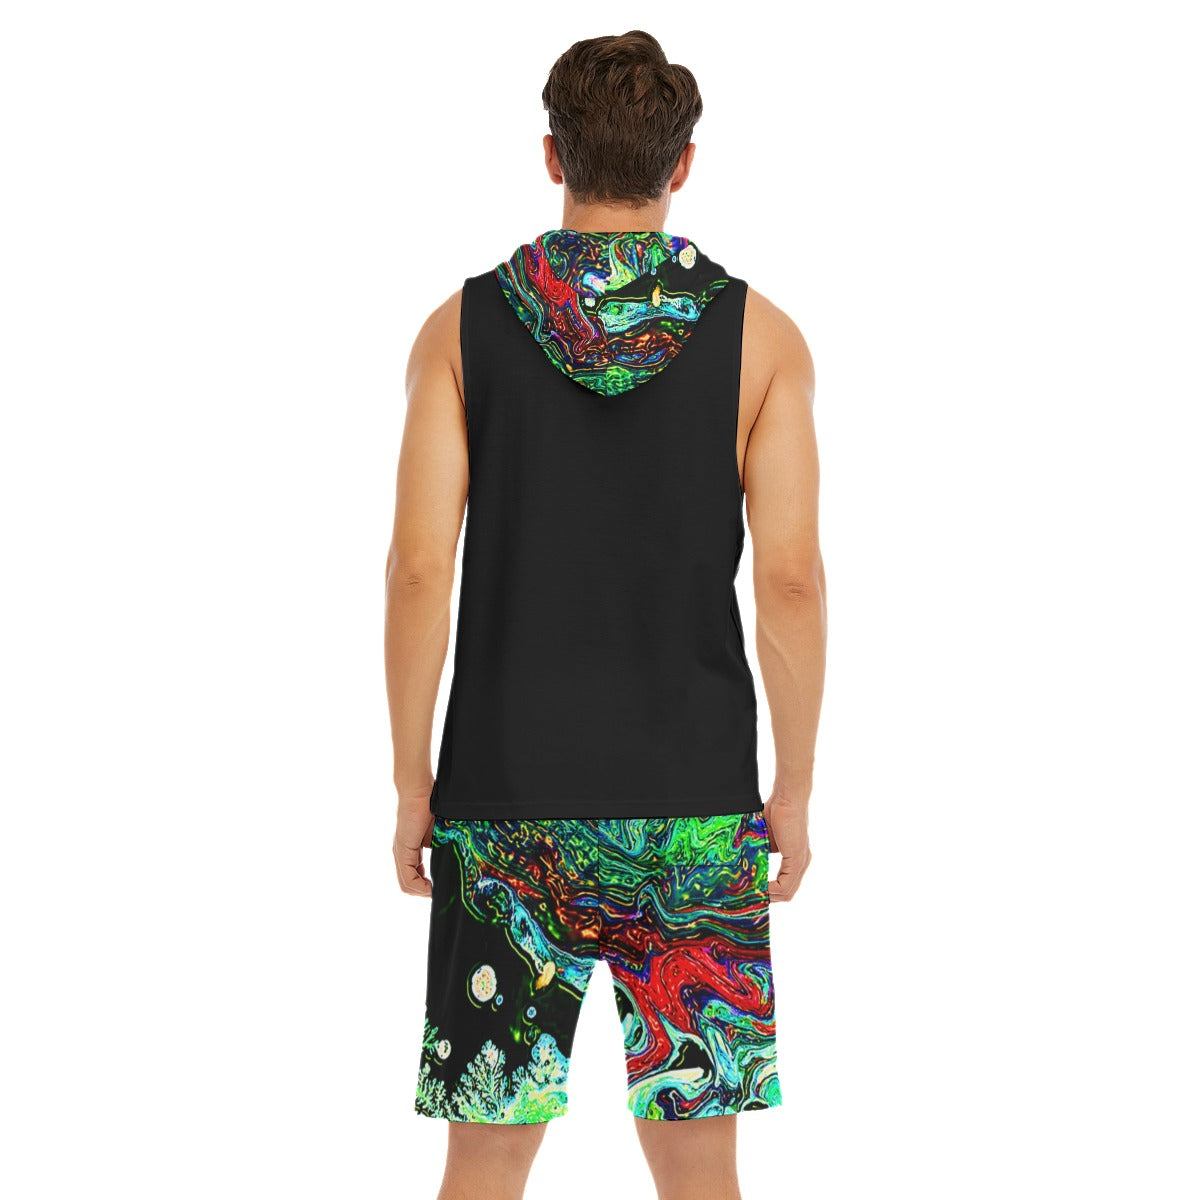 CDEJ Green Marble Men's Sleeveless Vest And Shorts Sets